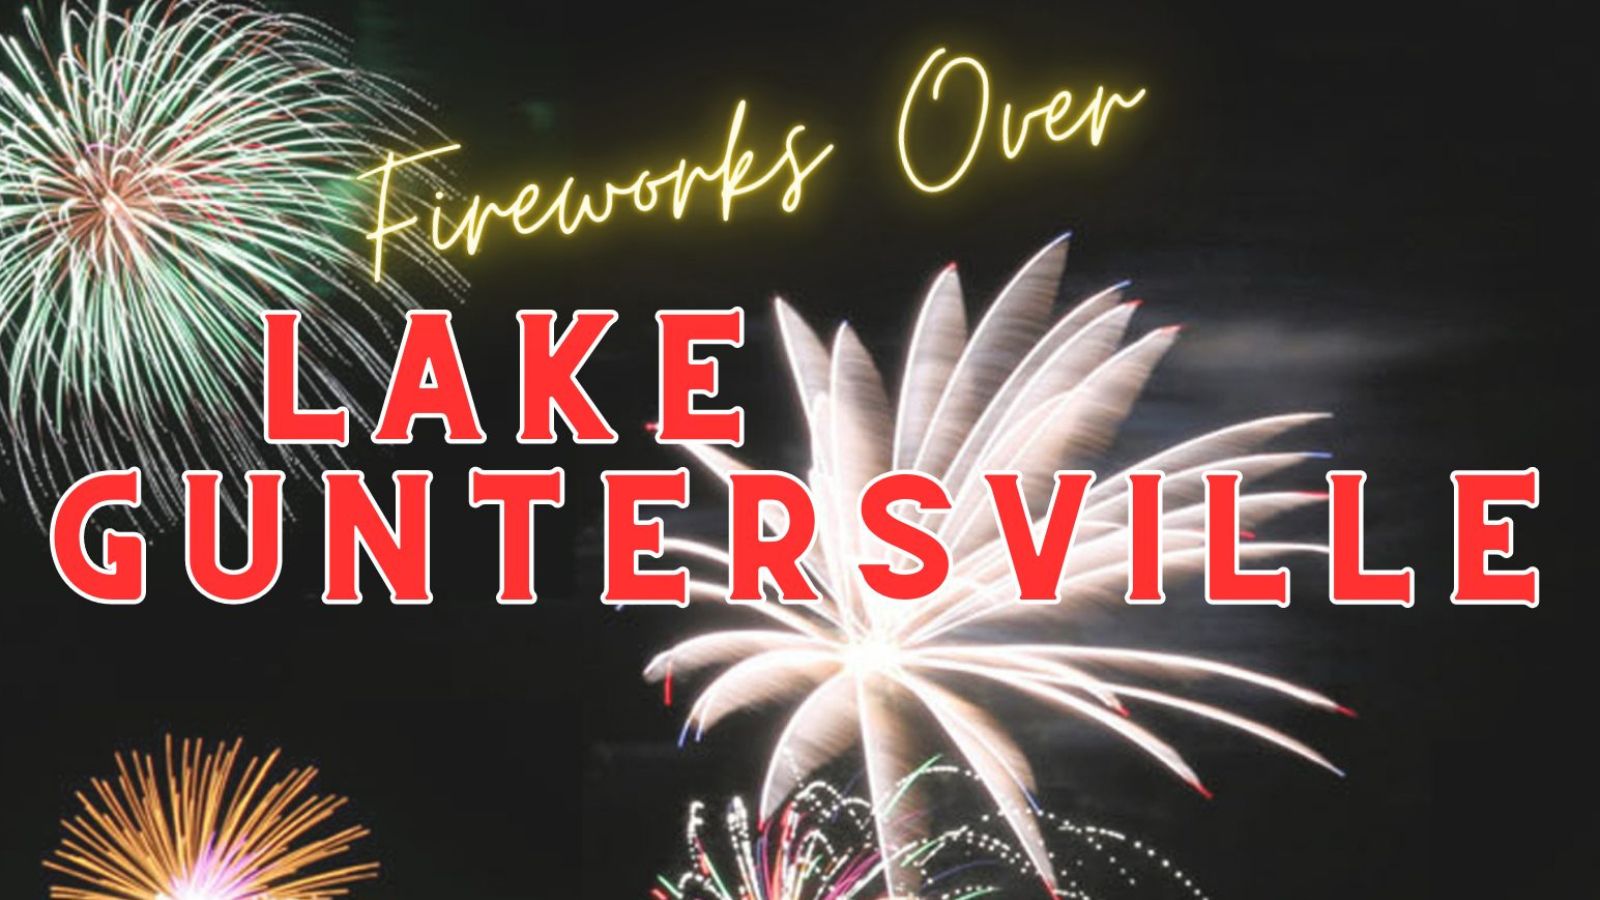 Fireworks Over Lake Guntersville – Rocket City Mom  Huntsville events,  activities, and resources for families.